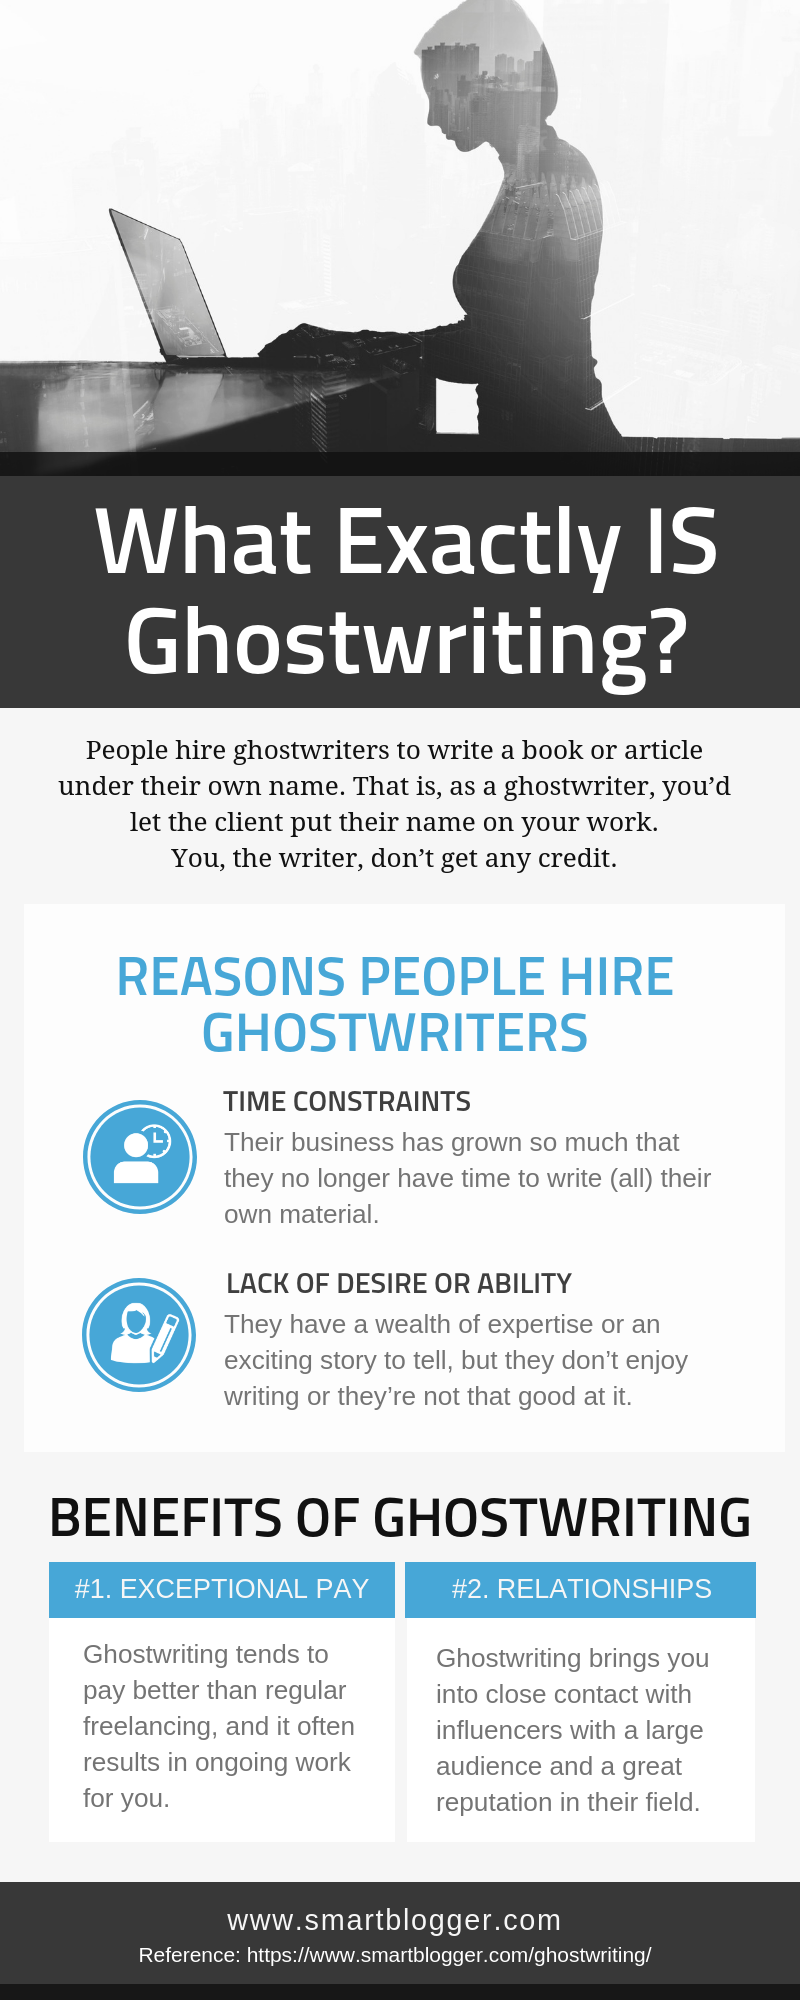 Ghostwriting 101: The Must-Read Ghostwriter Primer for 2019